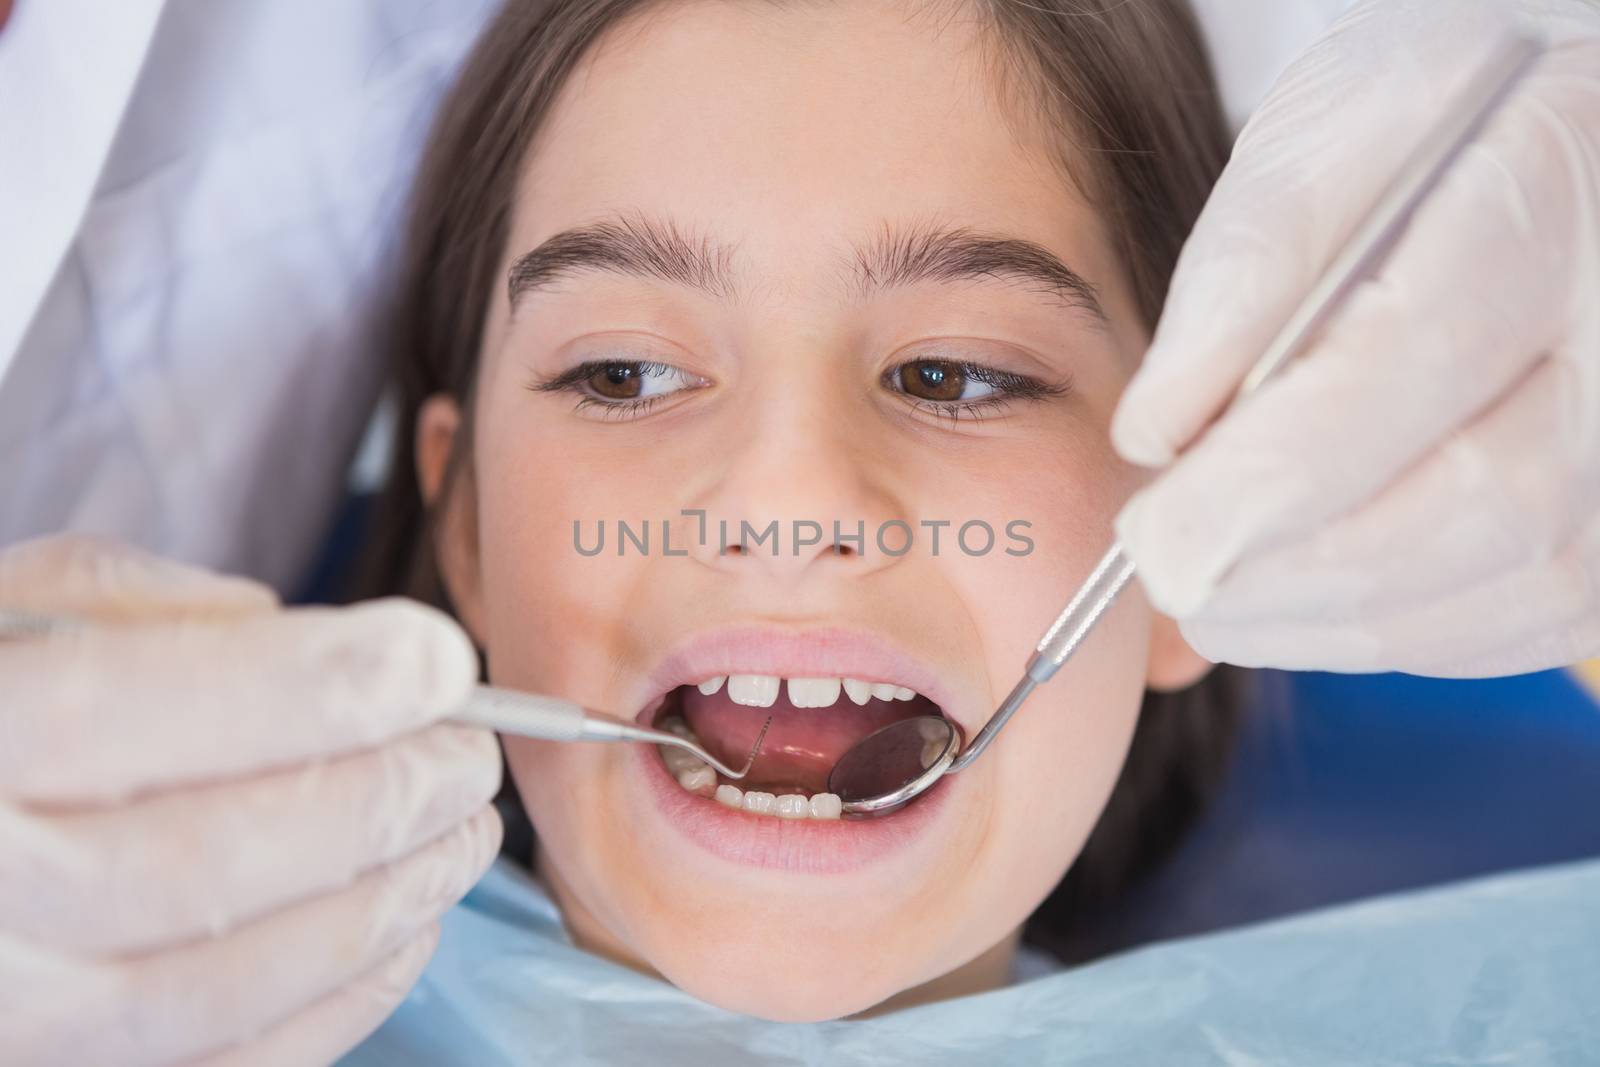 Dentist using dental explorer and angled mirror in mouth open of a patient 